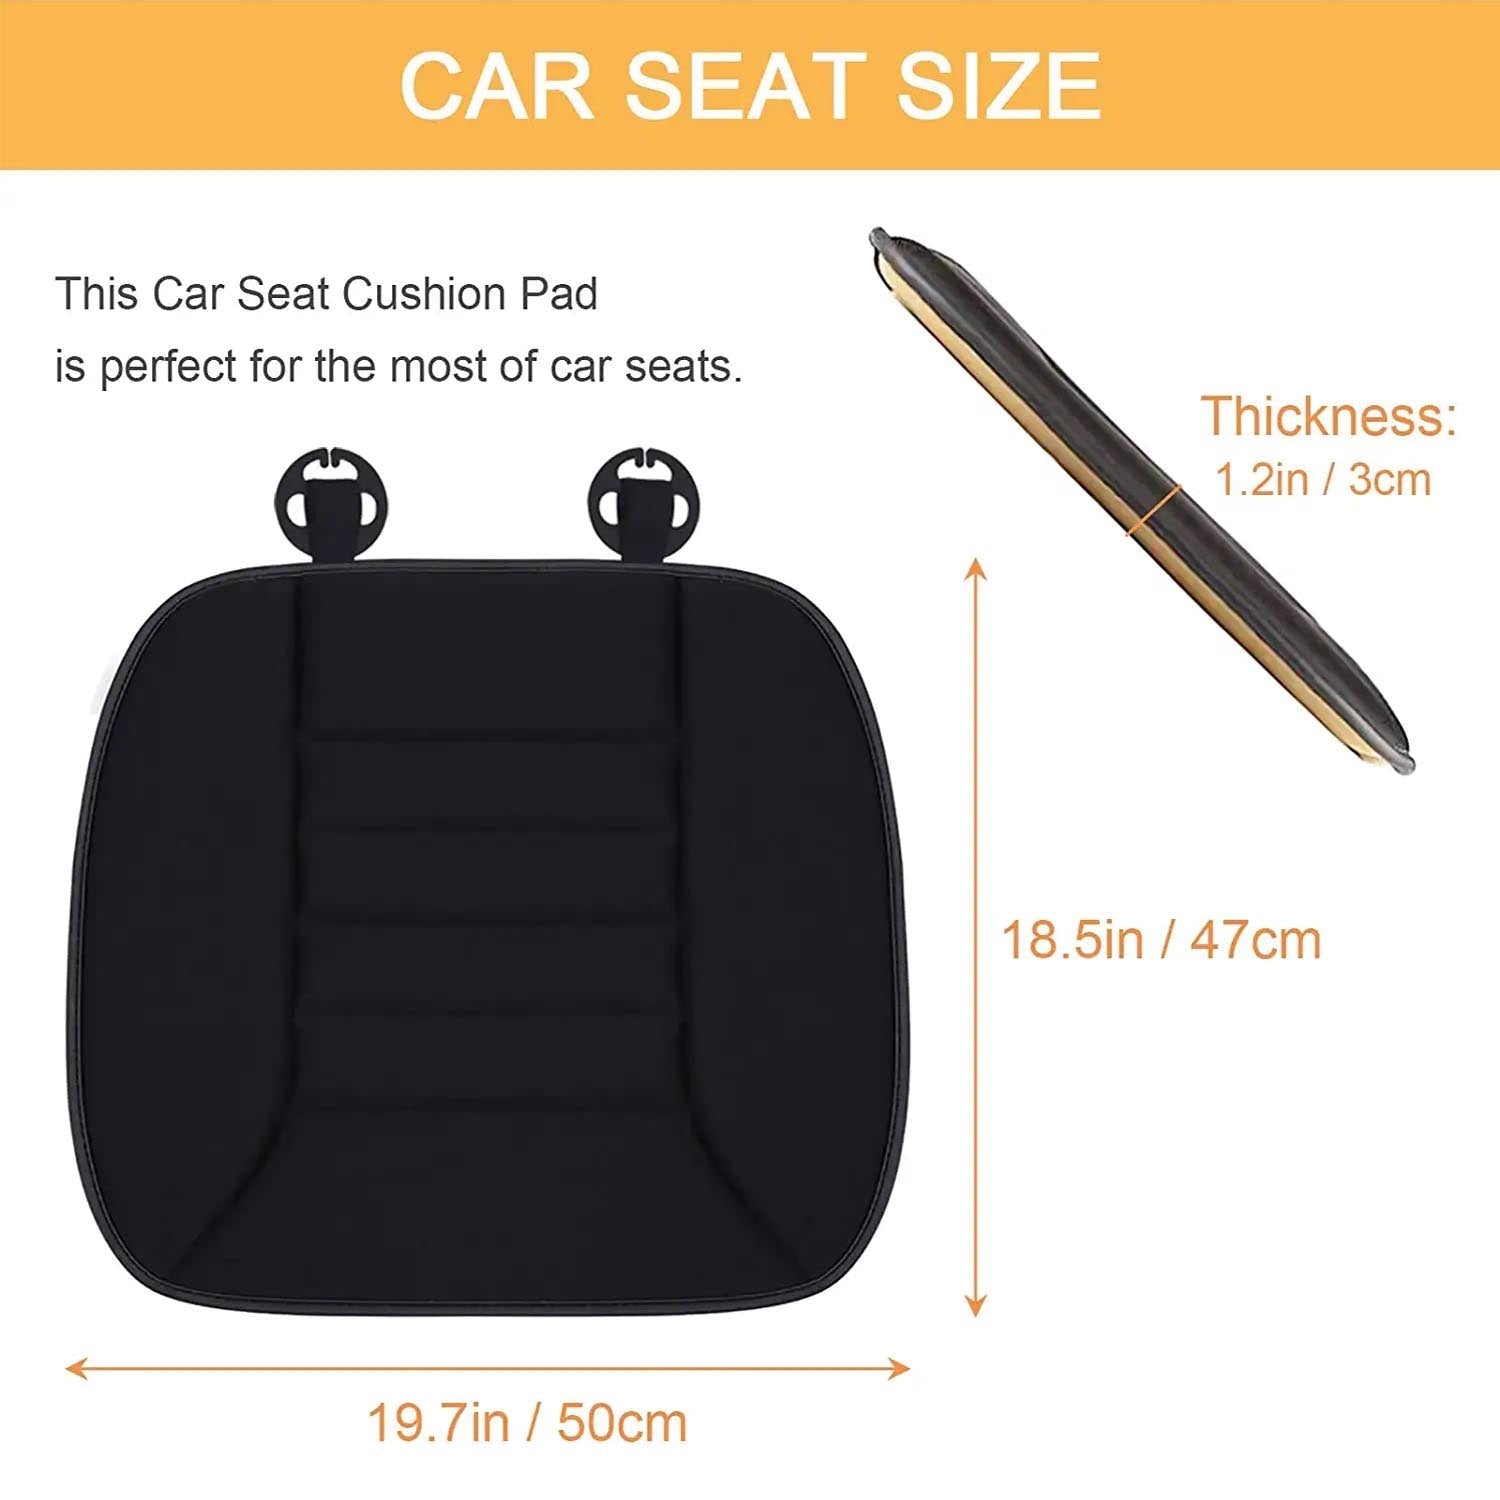 Car Seat Cushion with 1.2inch Comfort Memory Foam, Custom Logo For Your Cars, Seat Cushion for Car and Office Chair KX19989 - Delicate Leather